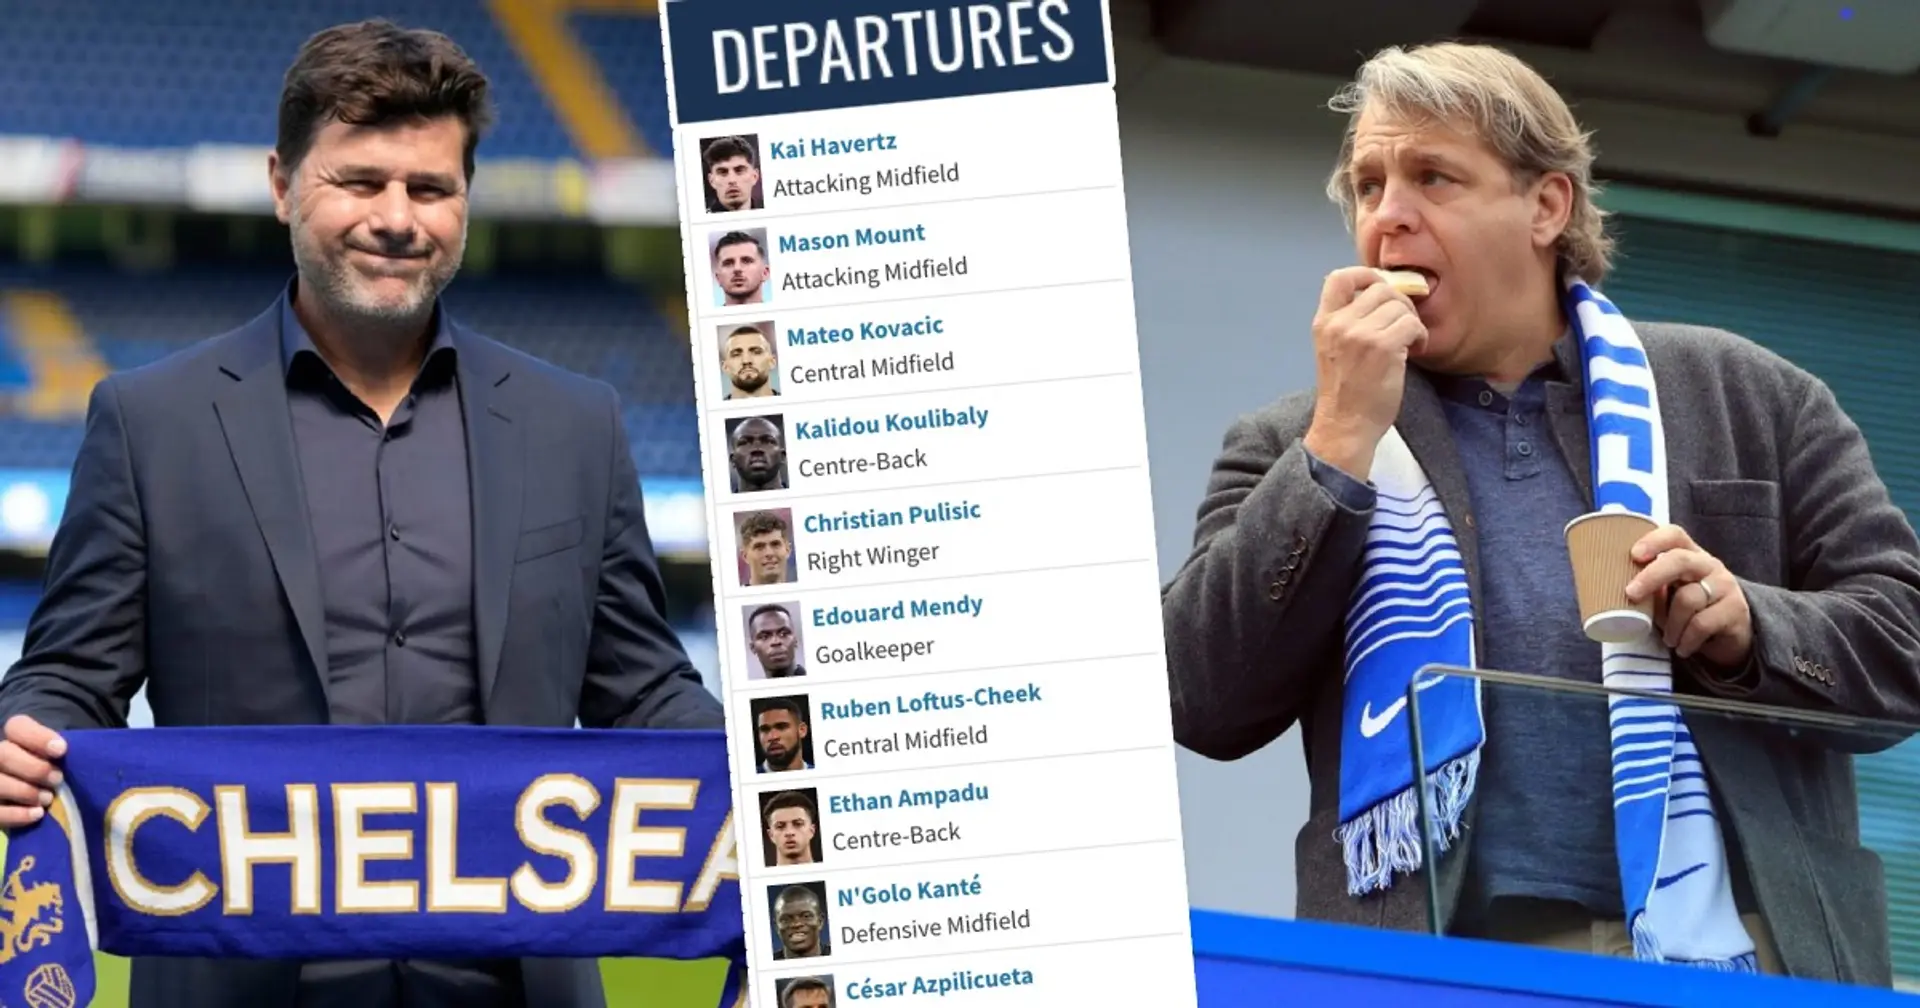 Top source explains the 'downside' of Chelsea selling so many players this summer